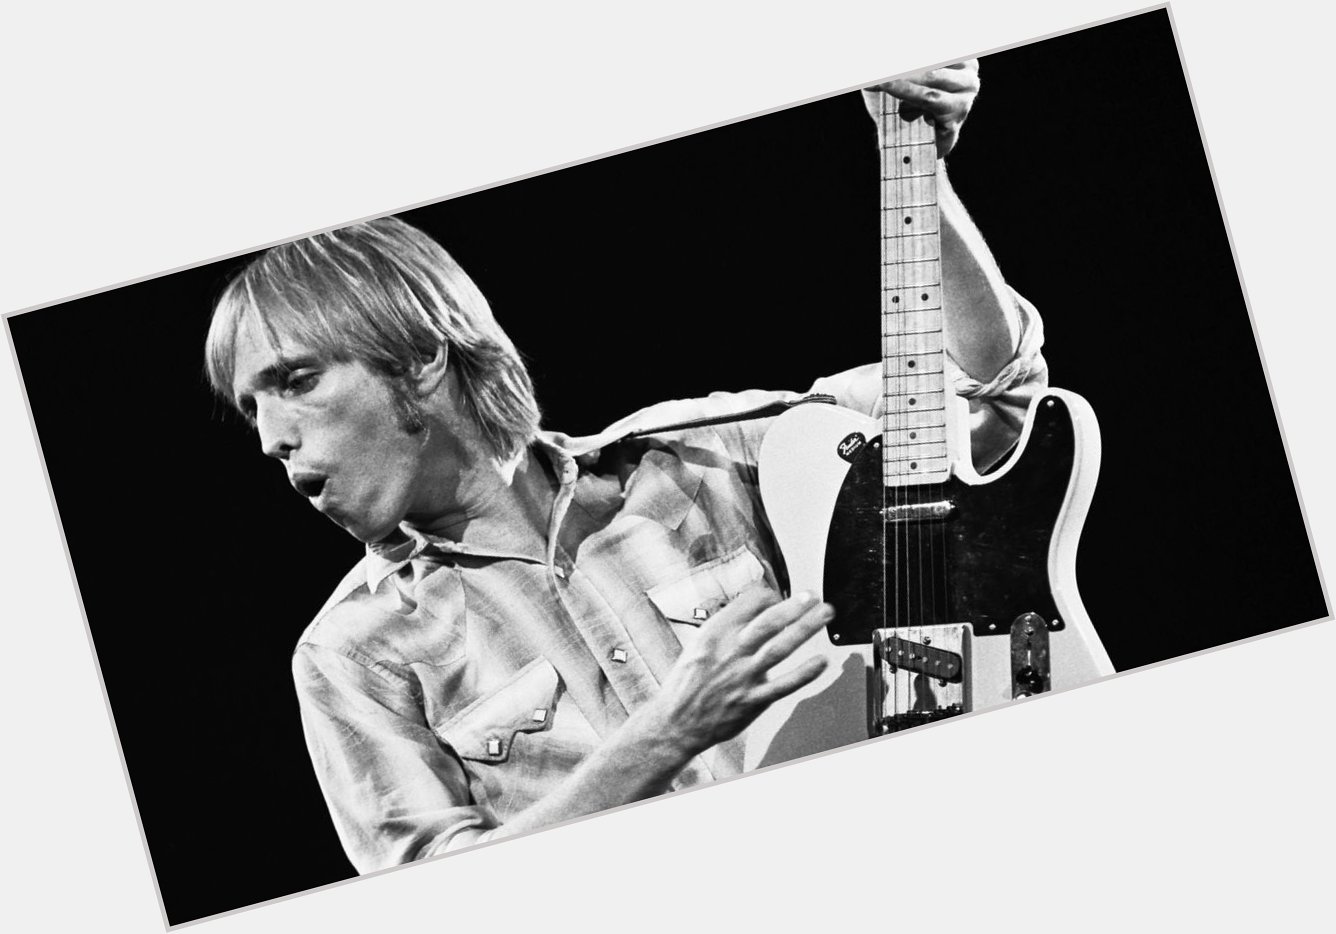 Happy birthday to the late, great Tom Petty, born this day in 1950 in Gainesville, Fla. 